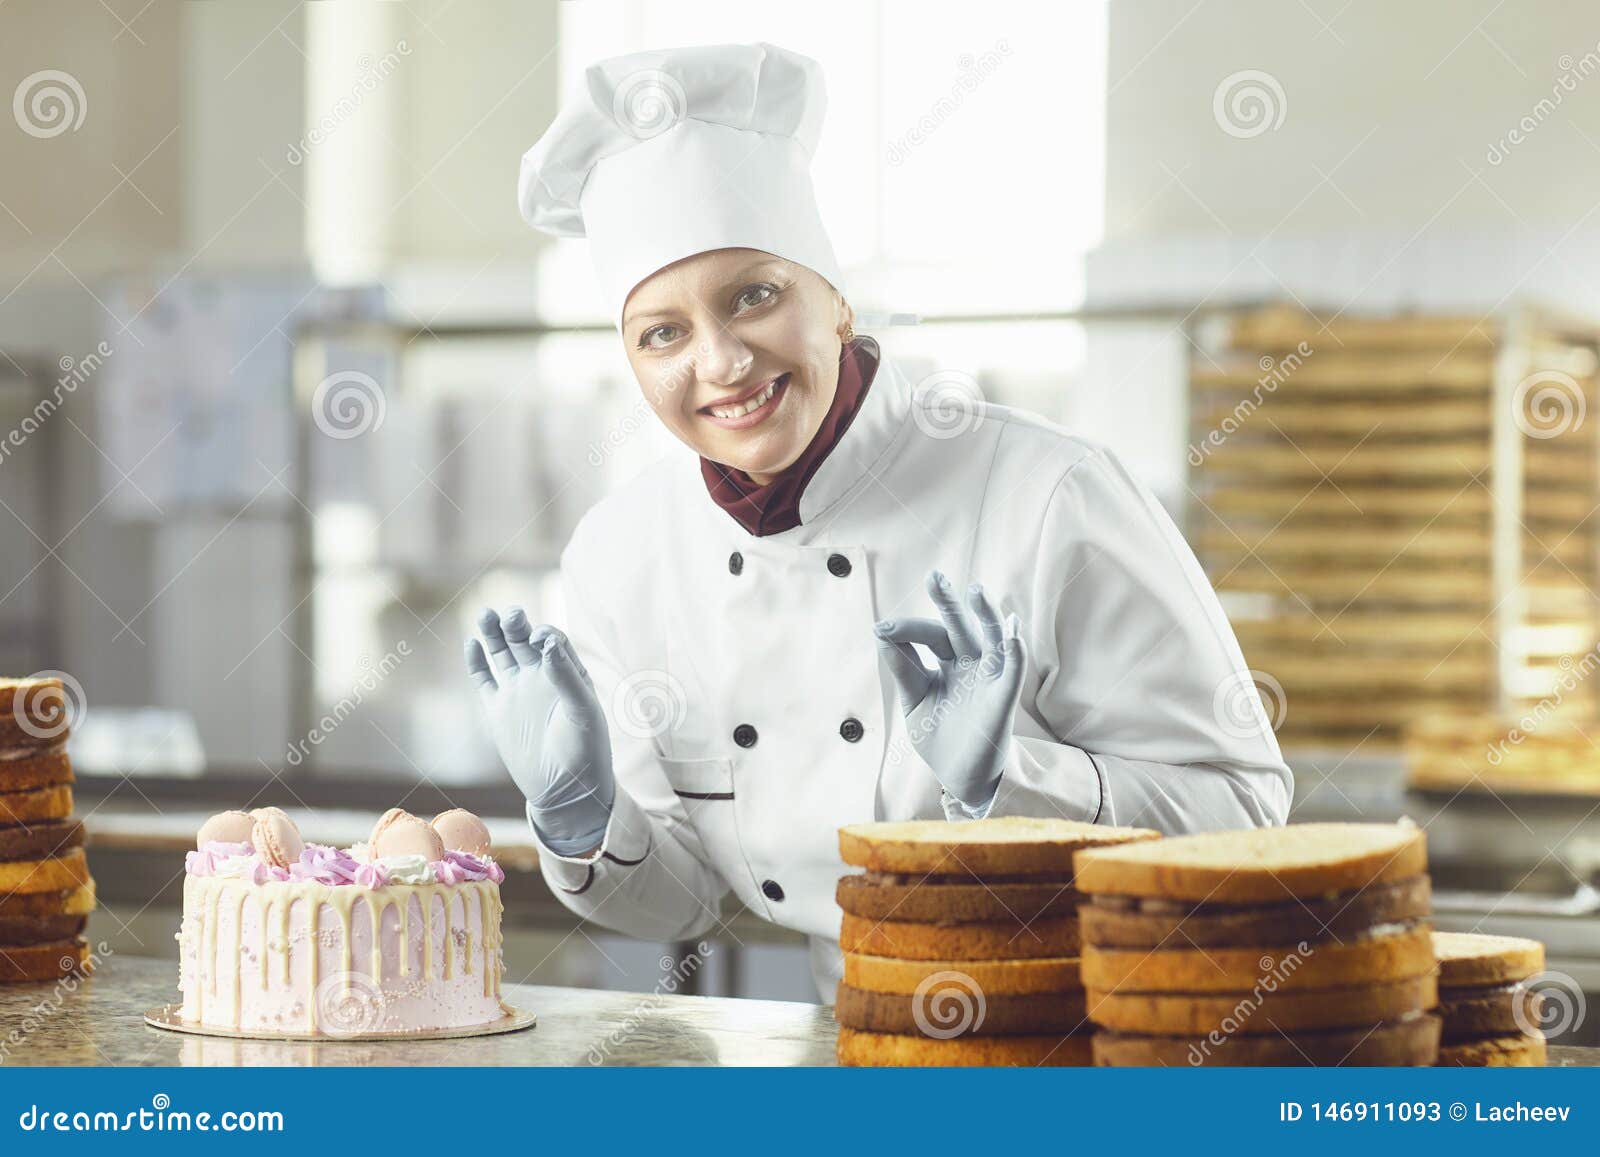 pastry chef girl, baker holds whisk in her hands, cooked cake on